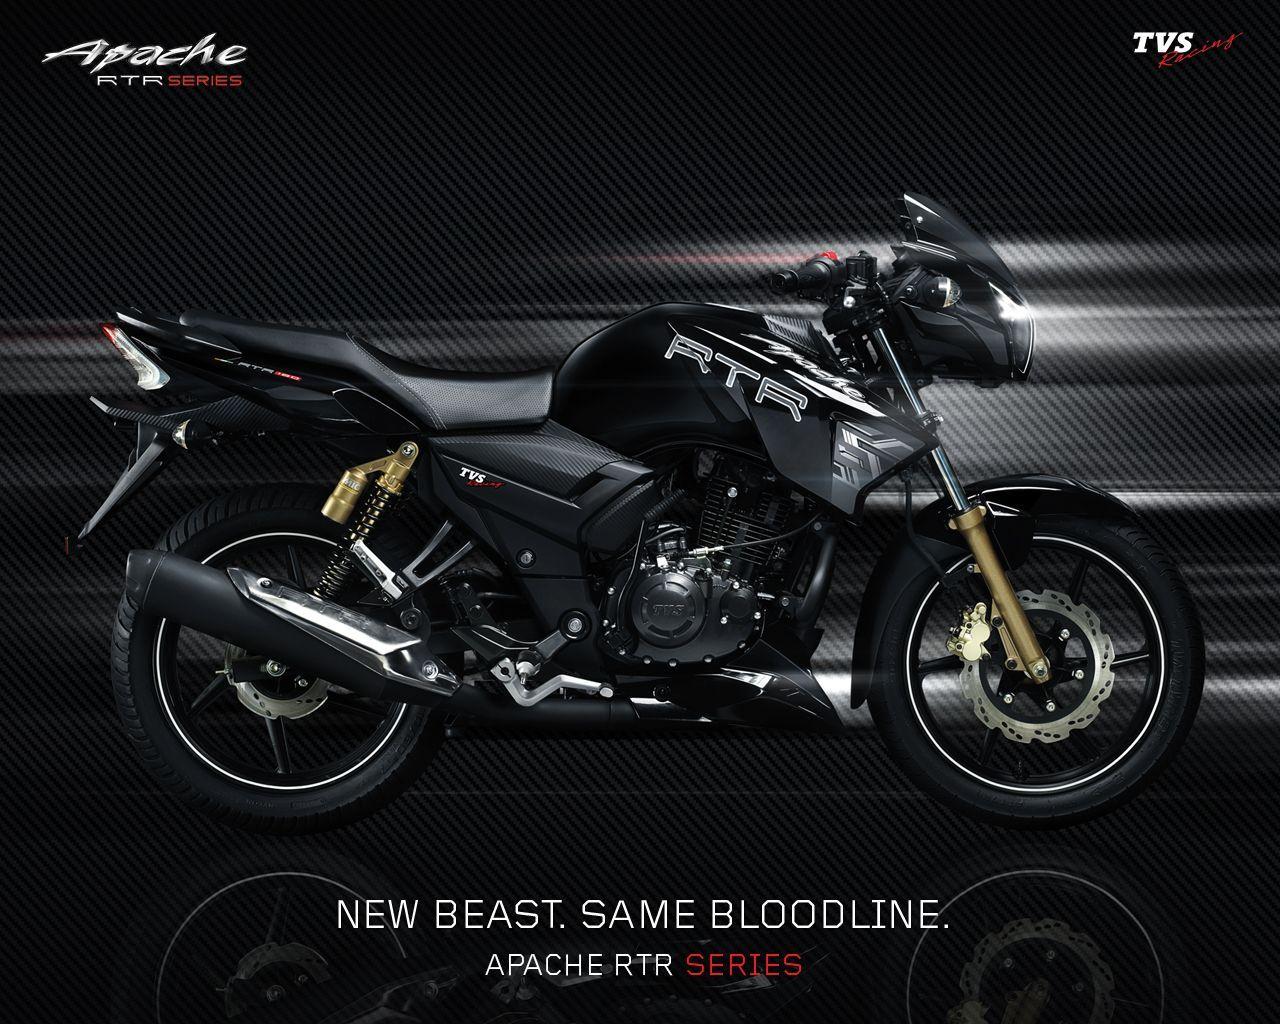 Tvs Apache Rtr 180 2019 Model Wallpapers Wallpaper Cave